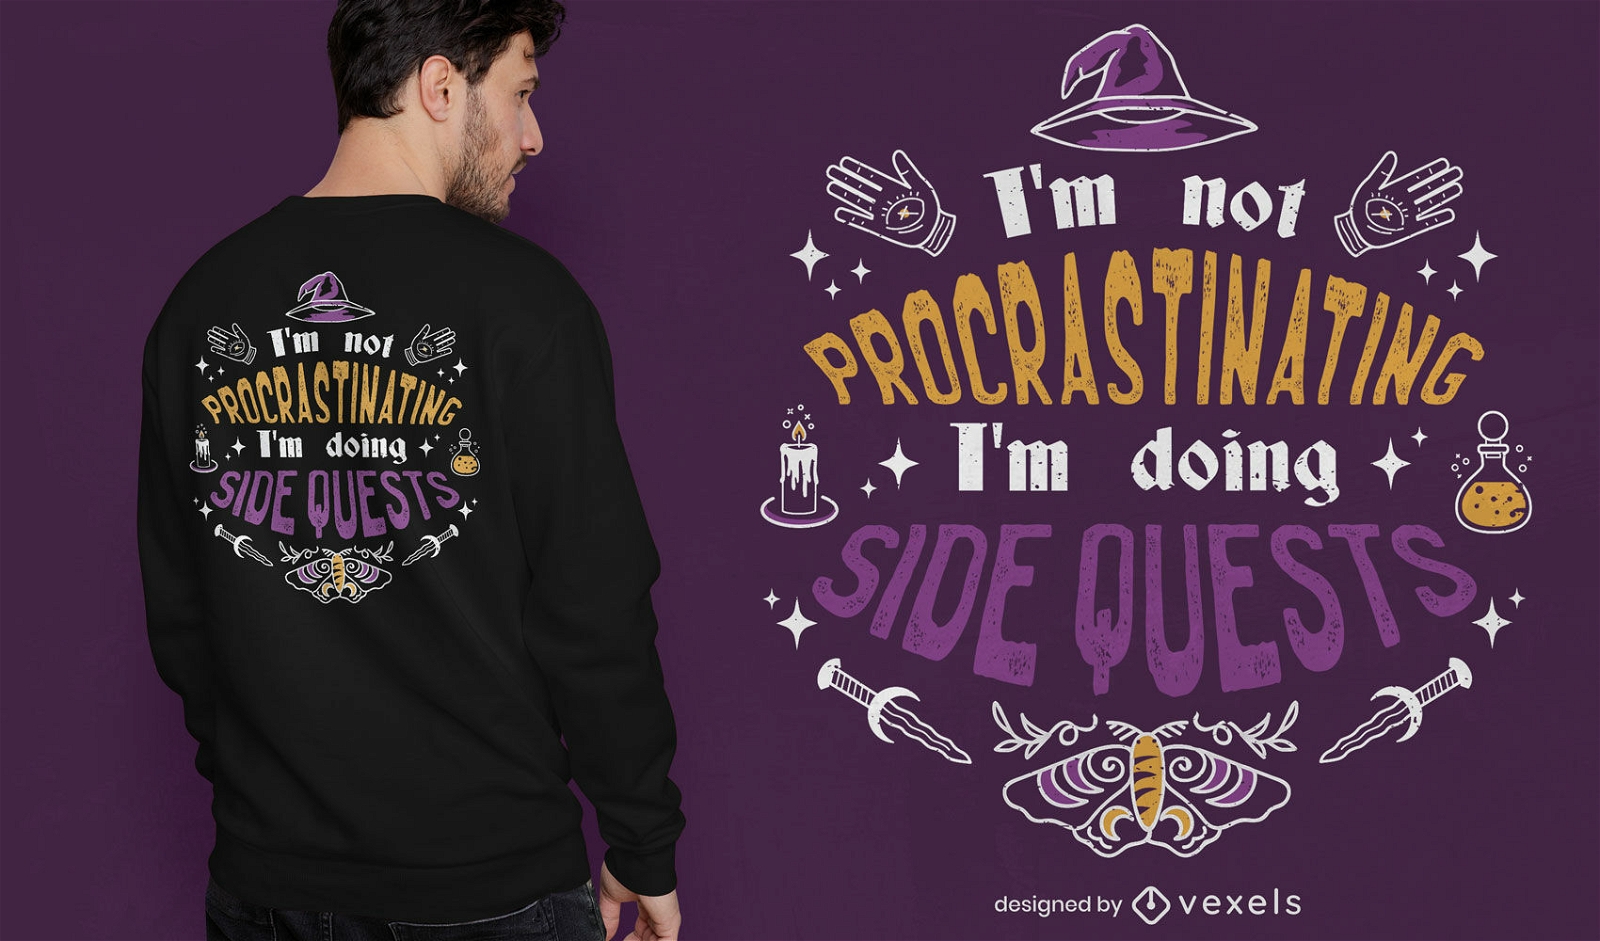 Videogame magical quote t-shirt design